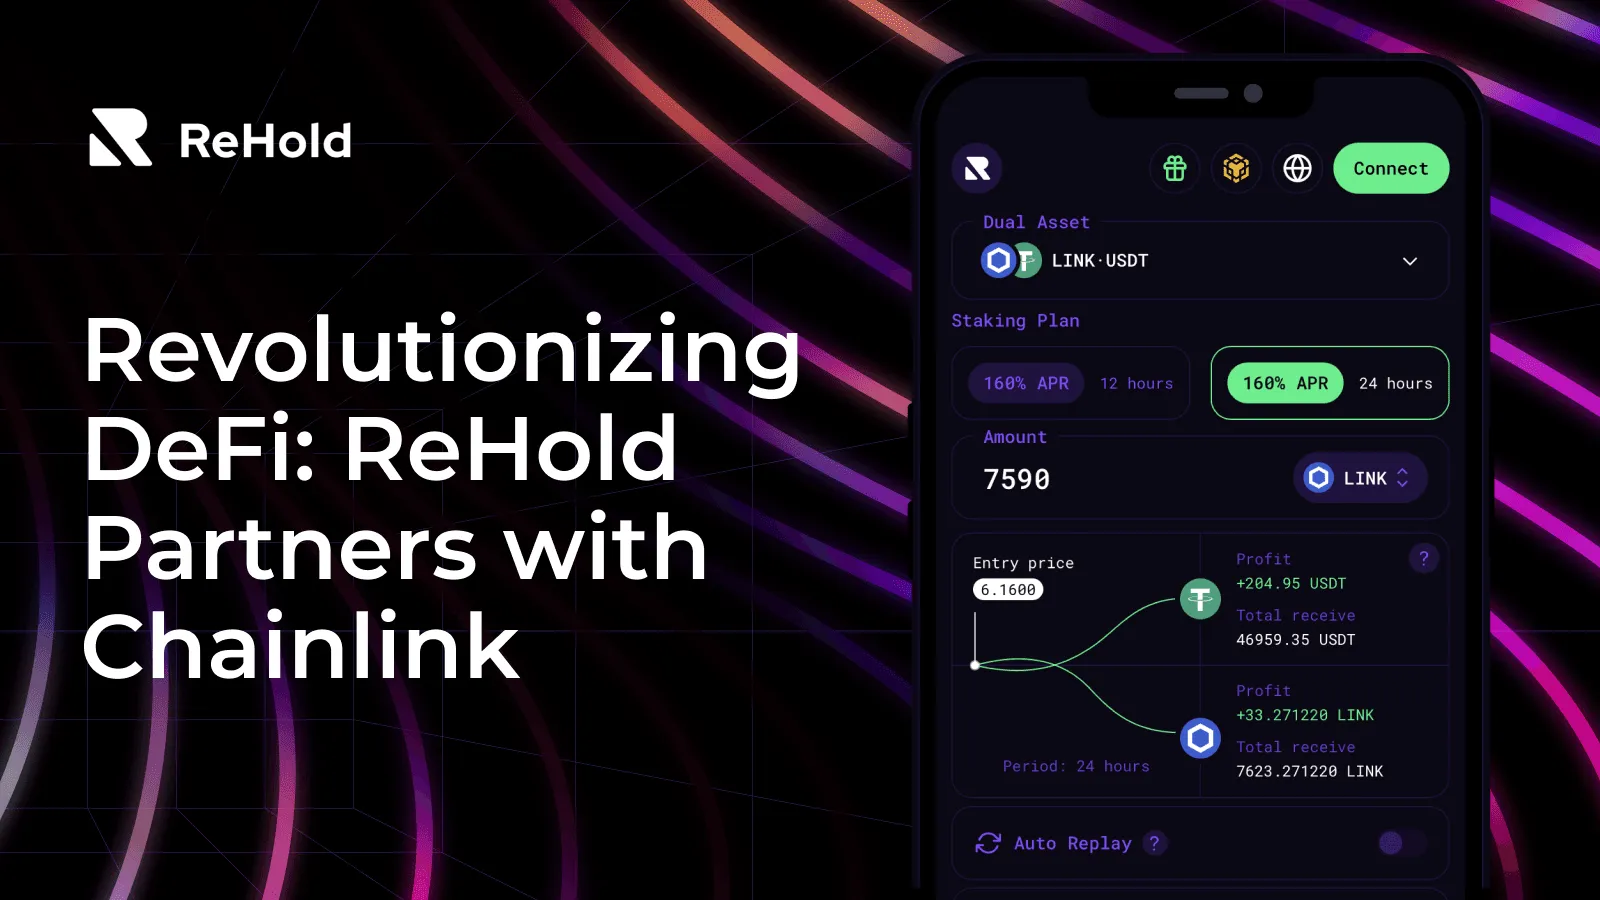 A Power Duo: ReHold Partners with Chainlink to Revolutionize Decentralized Finance